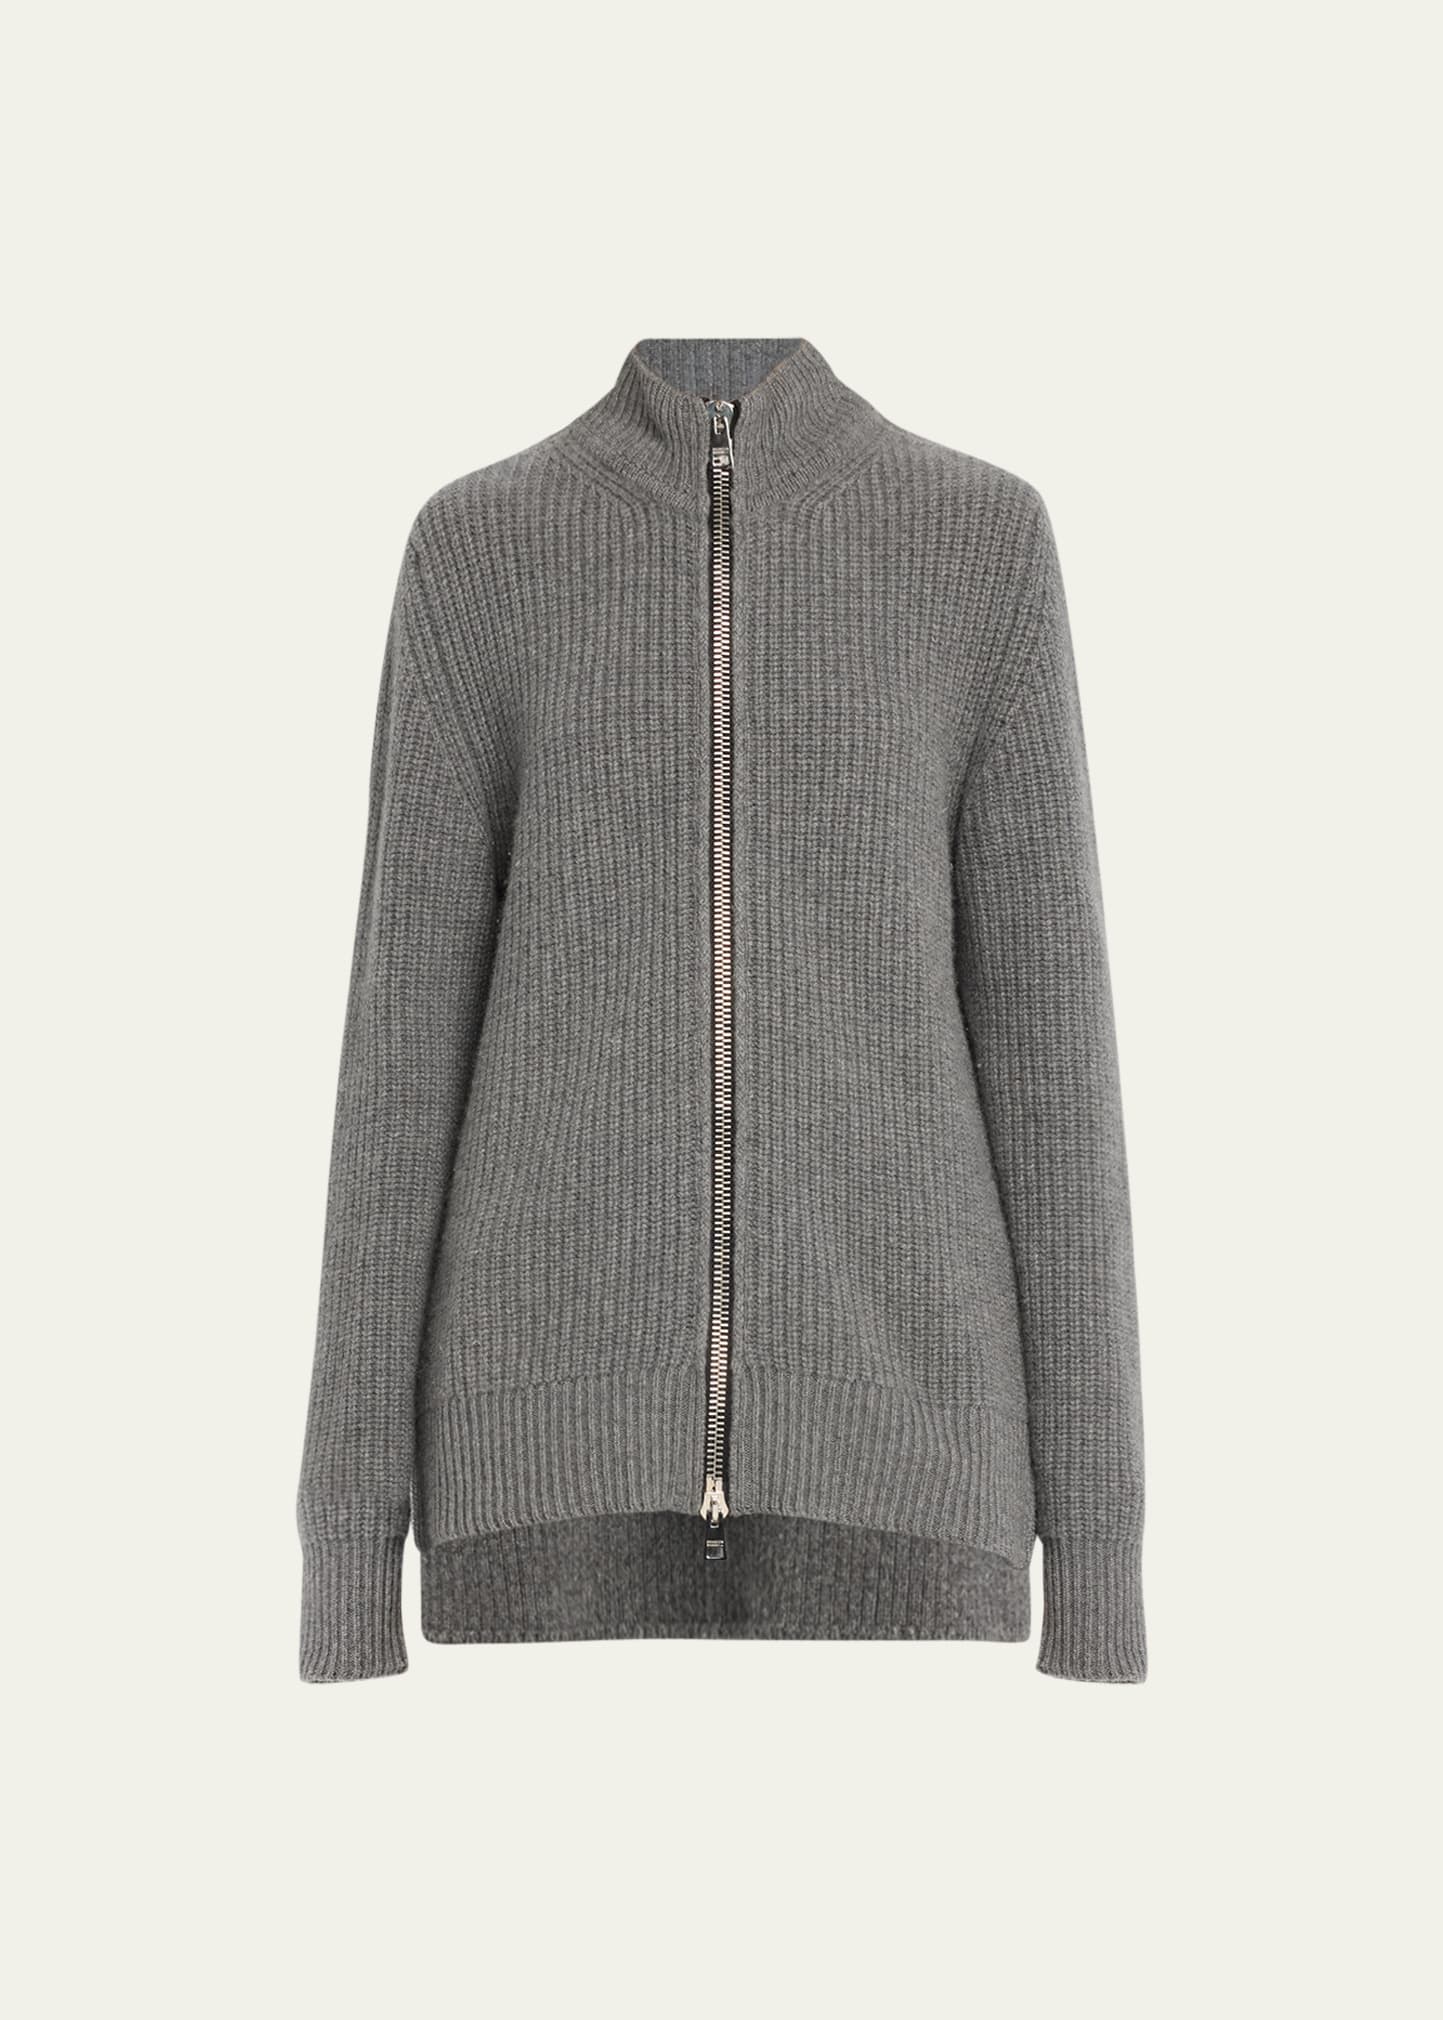 BRANDON MAXWELL THE MARCIE RIBBED WOOL-CASHMERE CARDIGAN